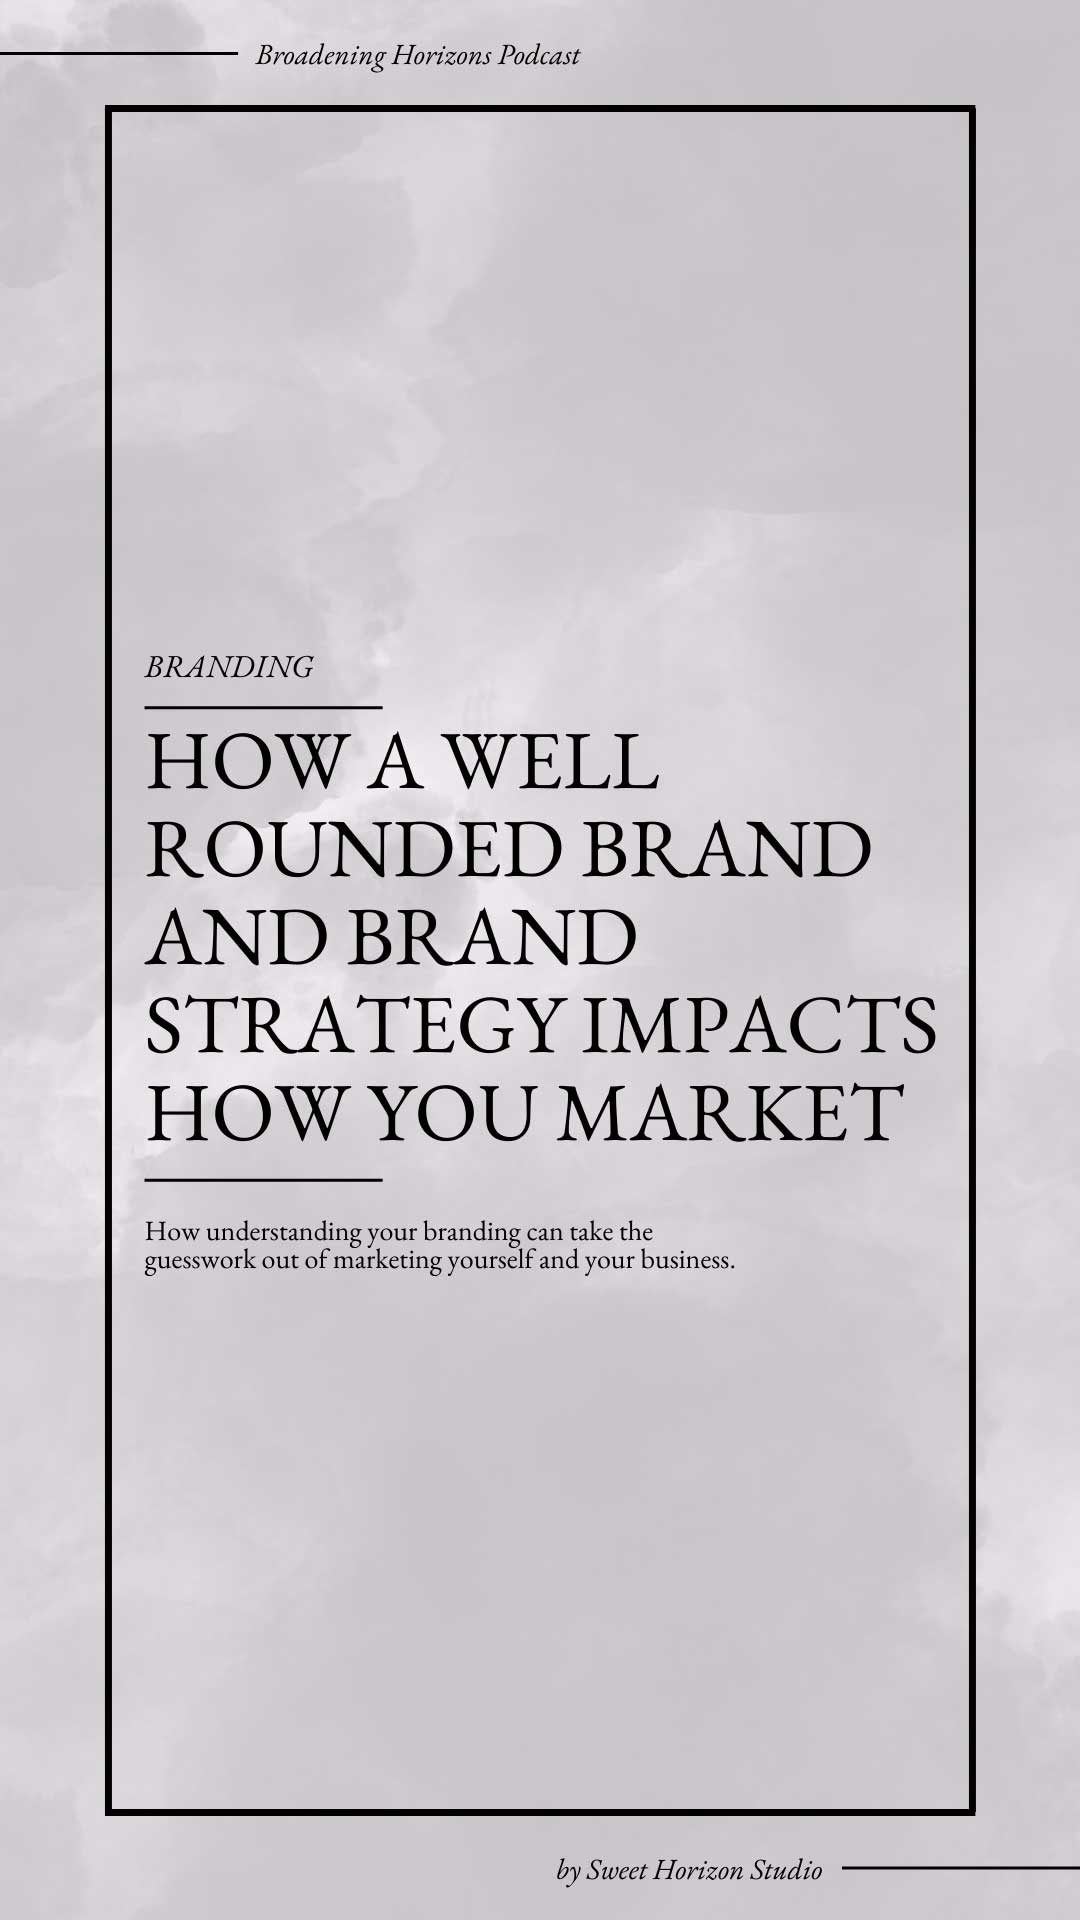 How a Well Rounded Brand and Brand Strategy Impacts How You Market from www.sweethorizonblog.com